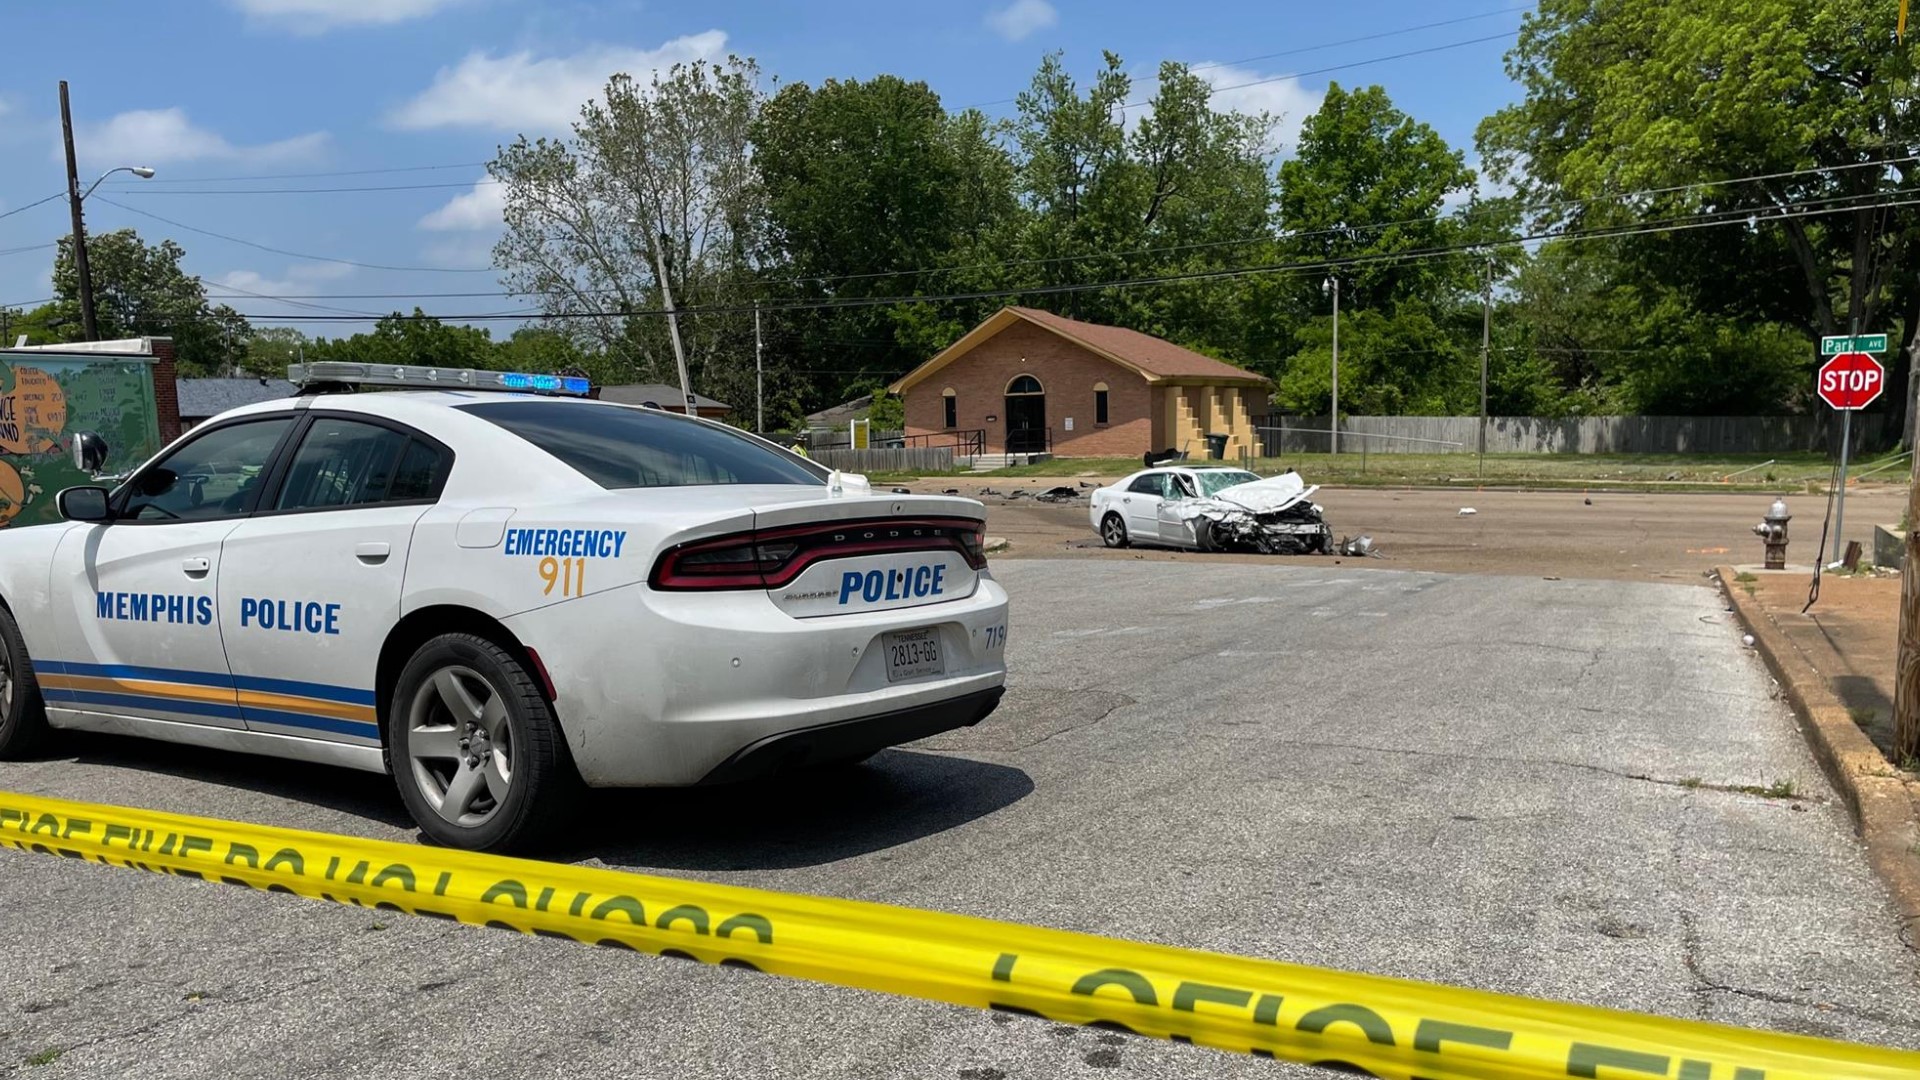 Two crashes Saturday morning each left one person dead, according to MPD — one at Airways Boulevard and Ketchum Road and the other at Ethel Street and Park Avenue.